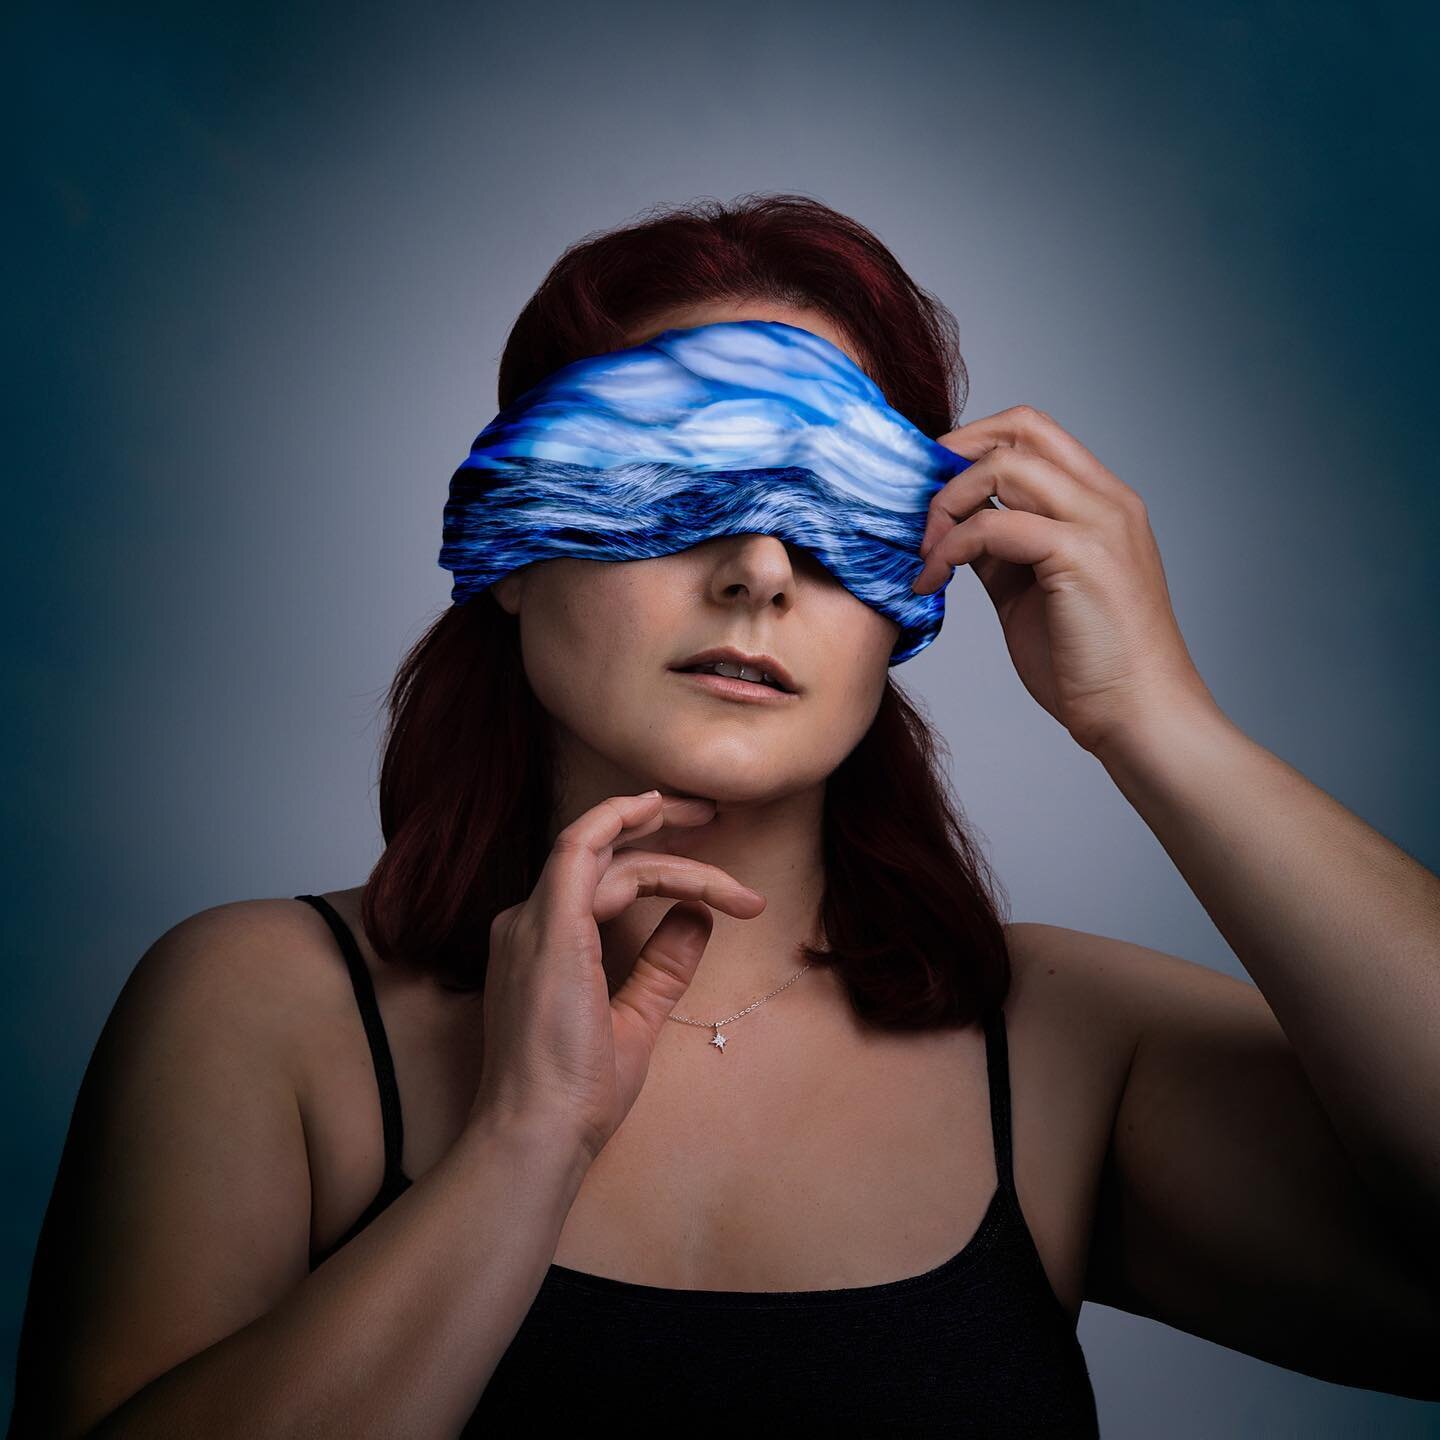 These are my tears, an ocean for you.

I created this image with simply the intention to try something new - to challenge my skills. For the scarf I used an image I took on a boat in the vast southern ocean below Tasmania. It filled me with awe. 

Th